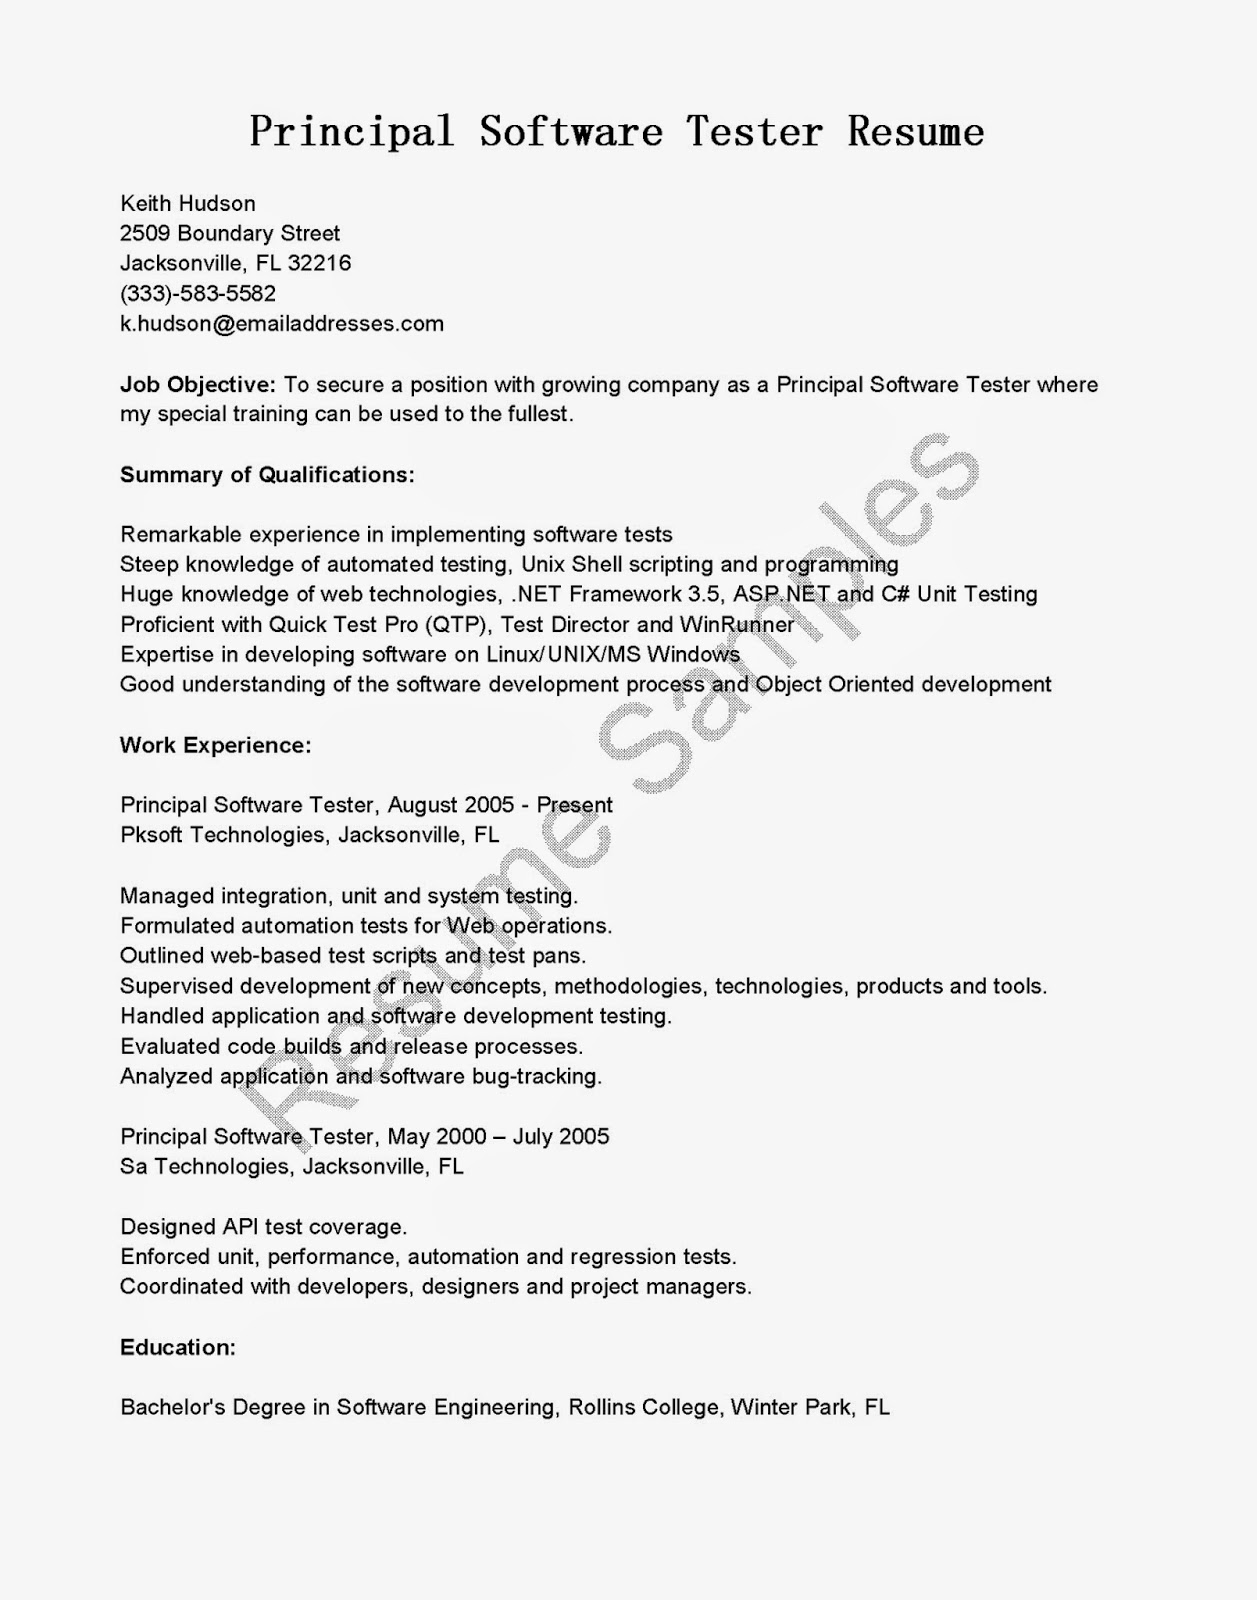 Director test resume example